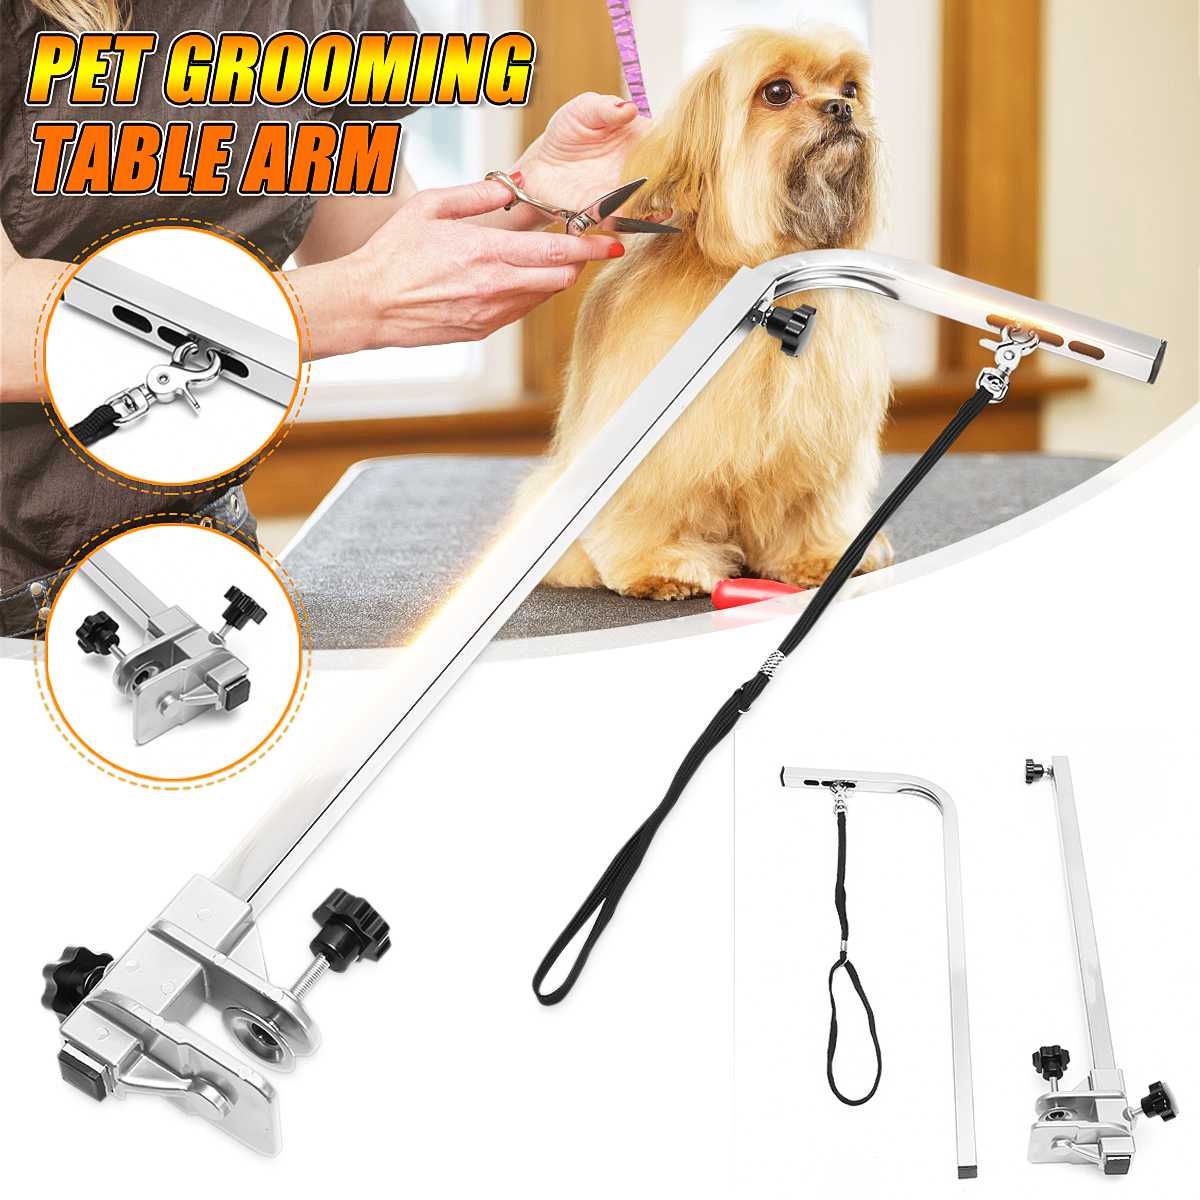 Small Dog/ Cat Clamp-On Grooming Arm